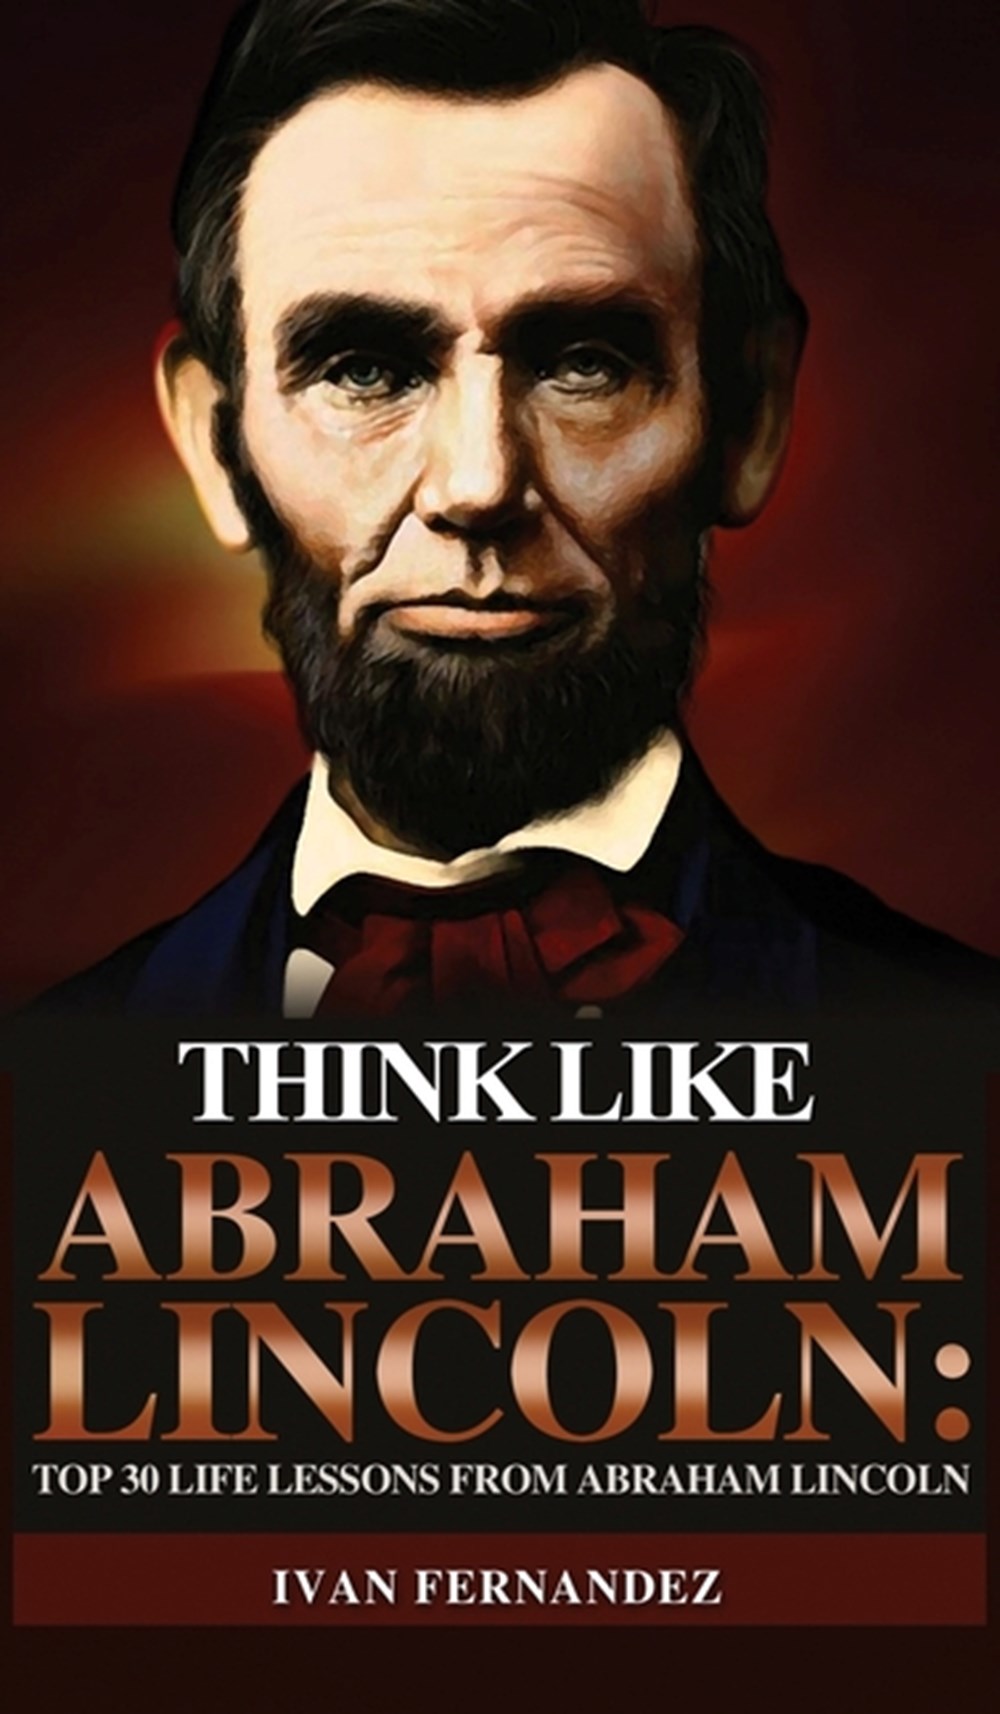 Think Like Abraham Lincoln Top 30 Life Lessons from Abraham Lincoln